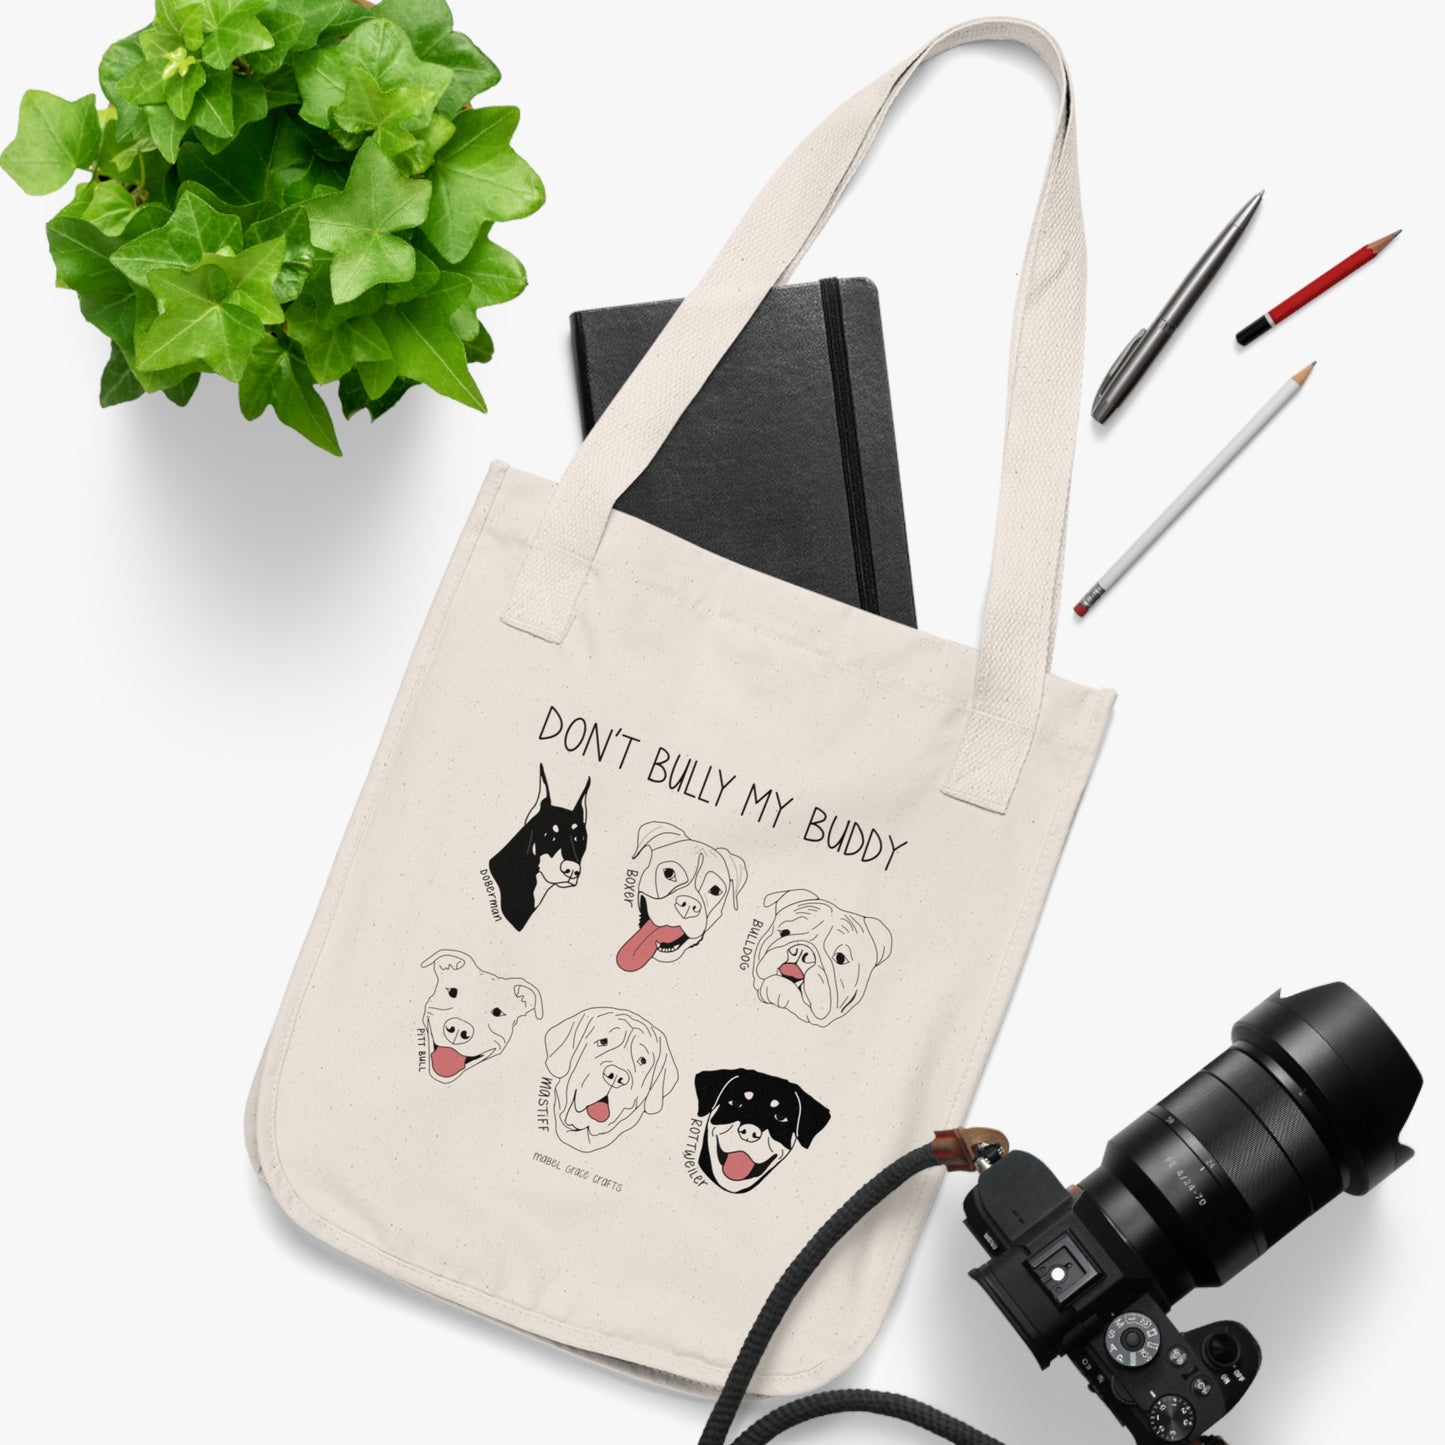 Don’t Bully My Buddy Tote